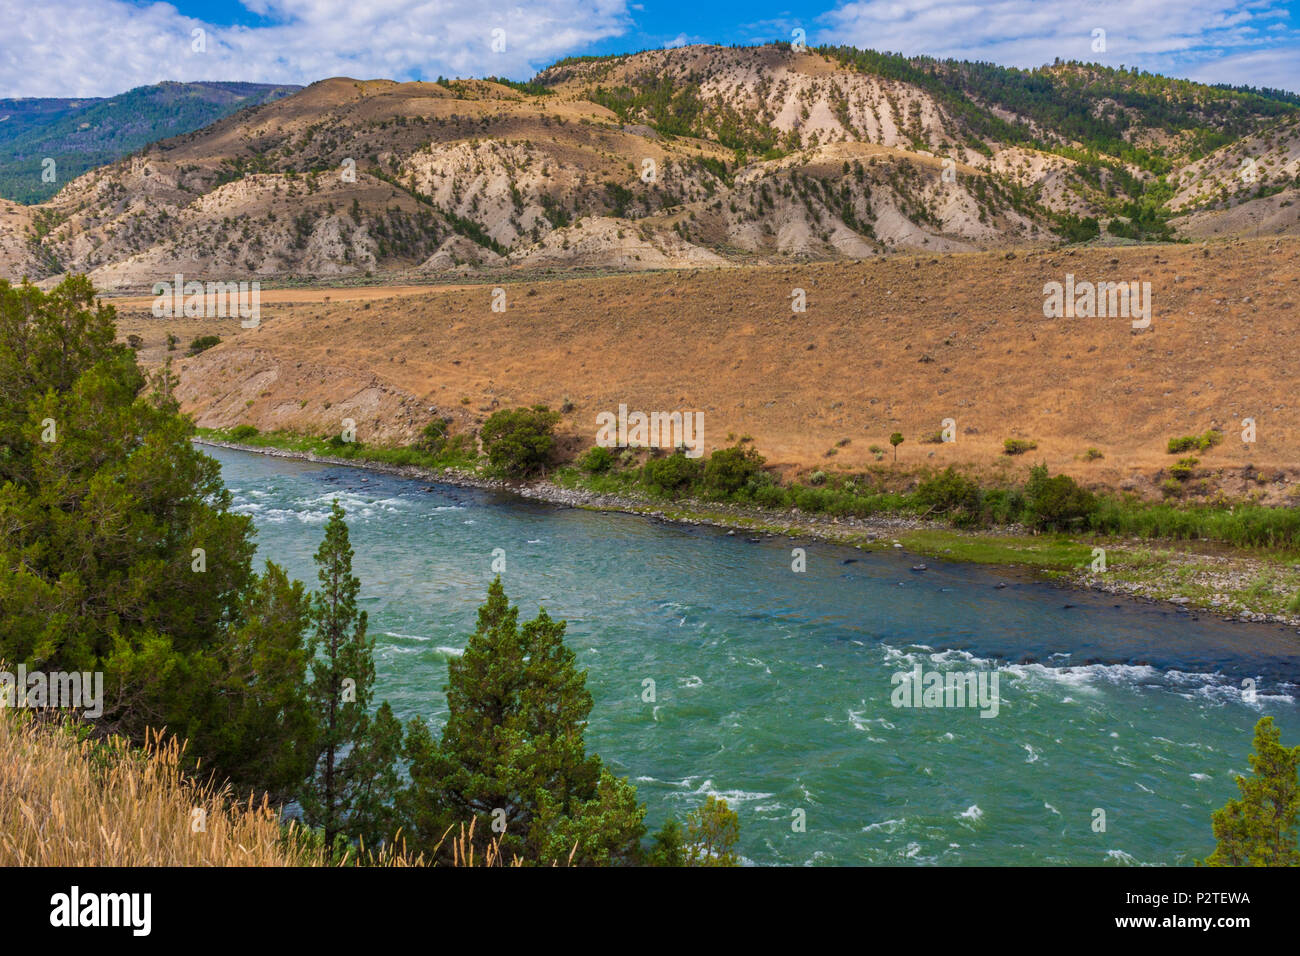 Yellowstone River in Southwest Montana along scenic highway 89. The Yellowstone is the last free flowing river in the lower 48 states. Stock Photo